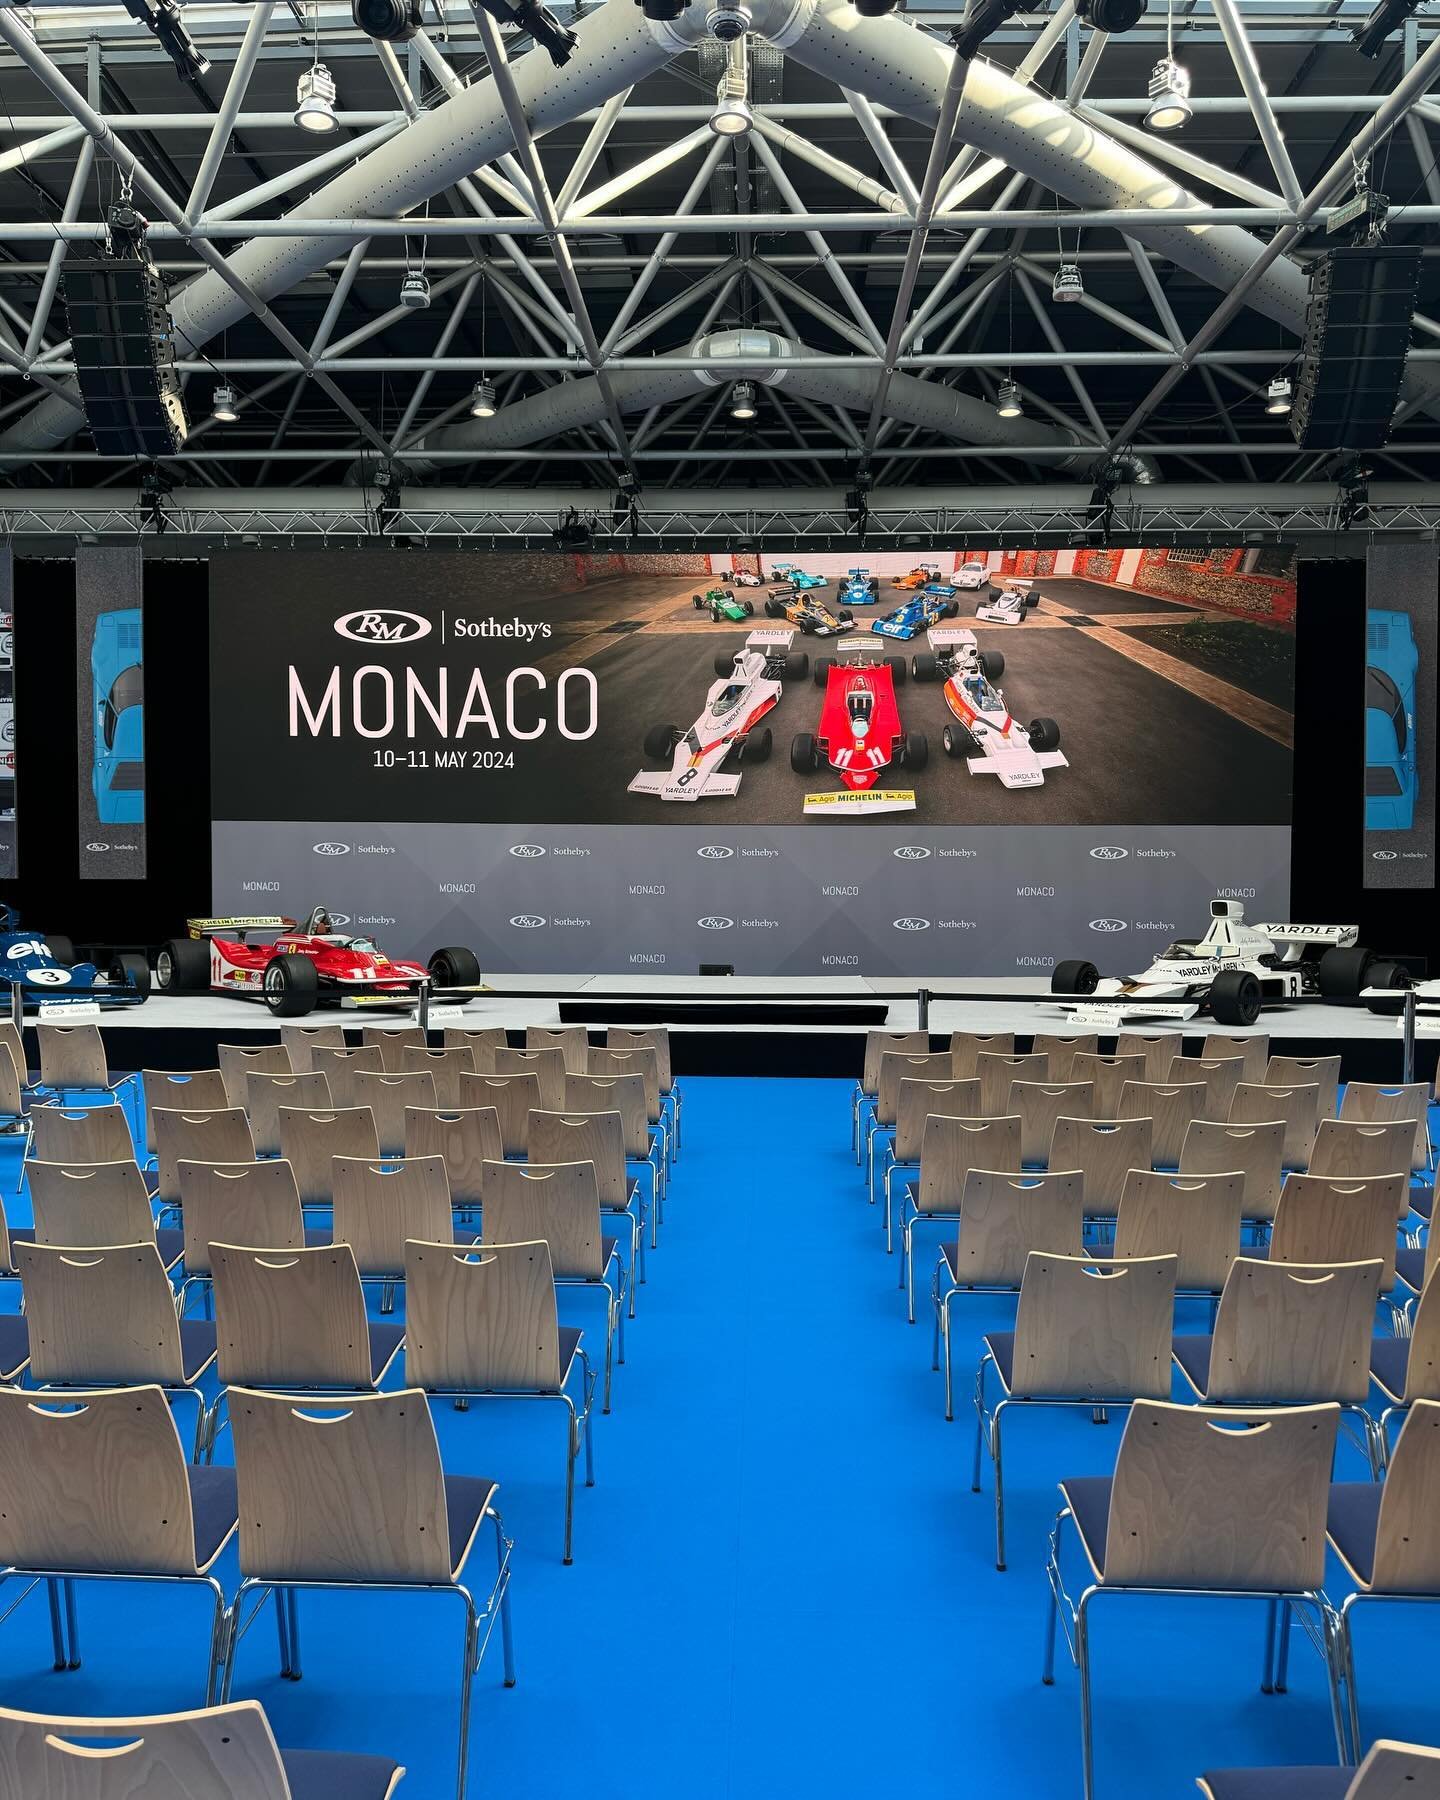 The calm before the storm.. first day of @rmsothebys #monaco auction of #jodyscheckter #ferrari #tyrrel #mclaren #alfaromeo viewing today, his lots tomorrow #auction #monacohistorique #monacohistoricgrandprix #formulaone #f1 #worldchampion